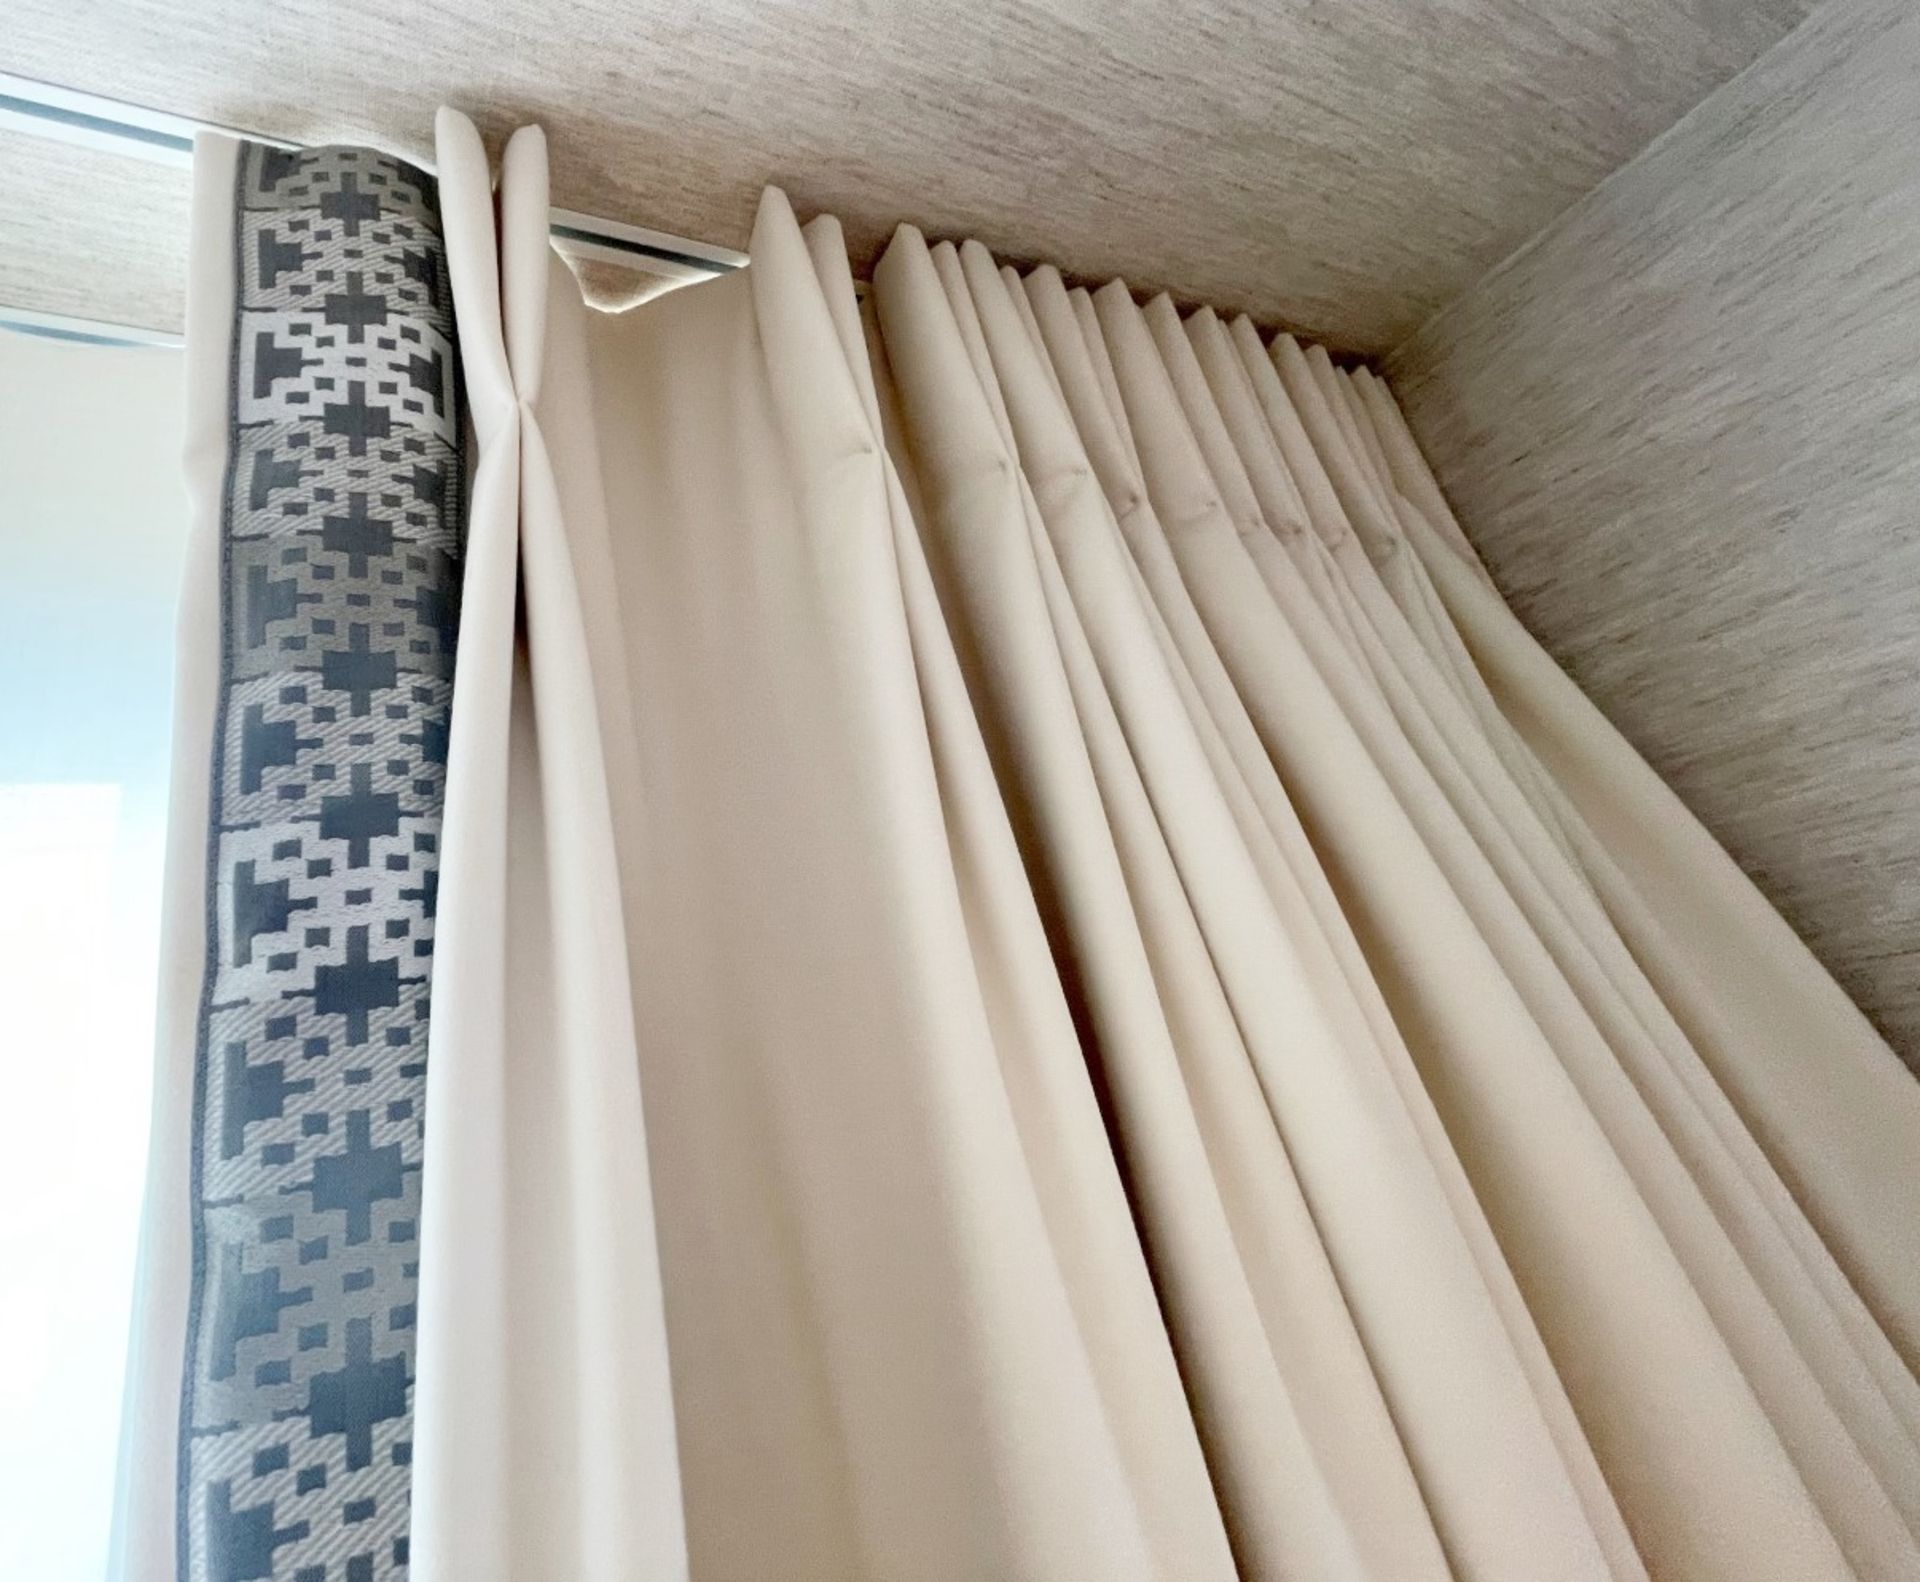 4 x Bespoke Made To Measure Premium Lined Curtains - Includes 1 x Pair & 2 x Single Blinds + Voiles - Image 9 of 13